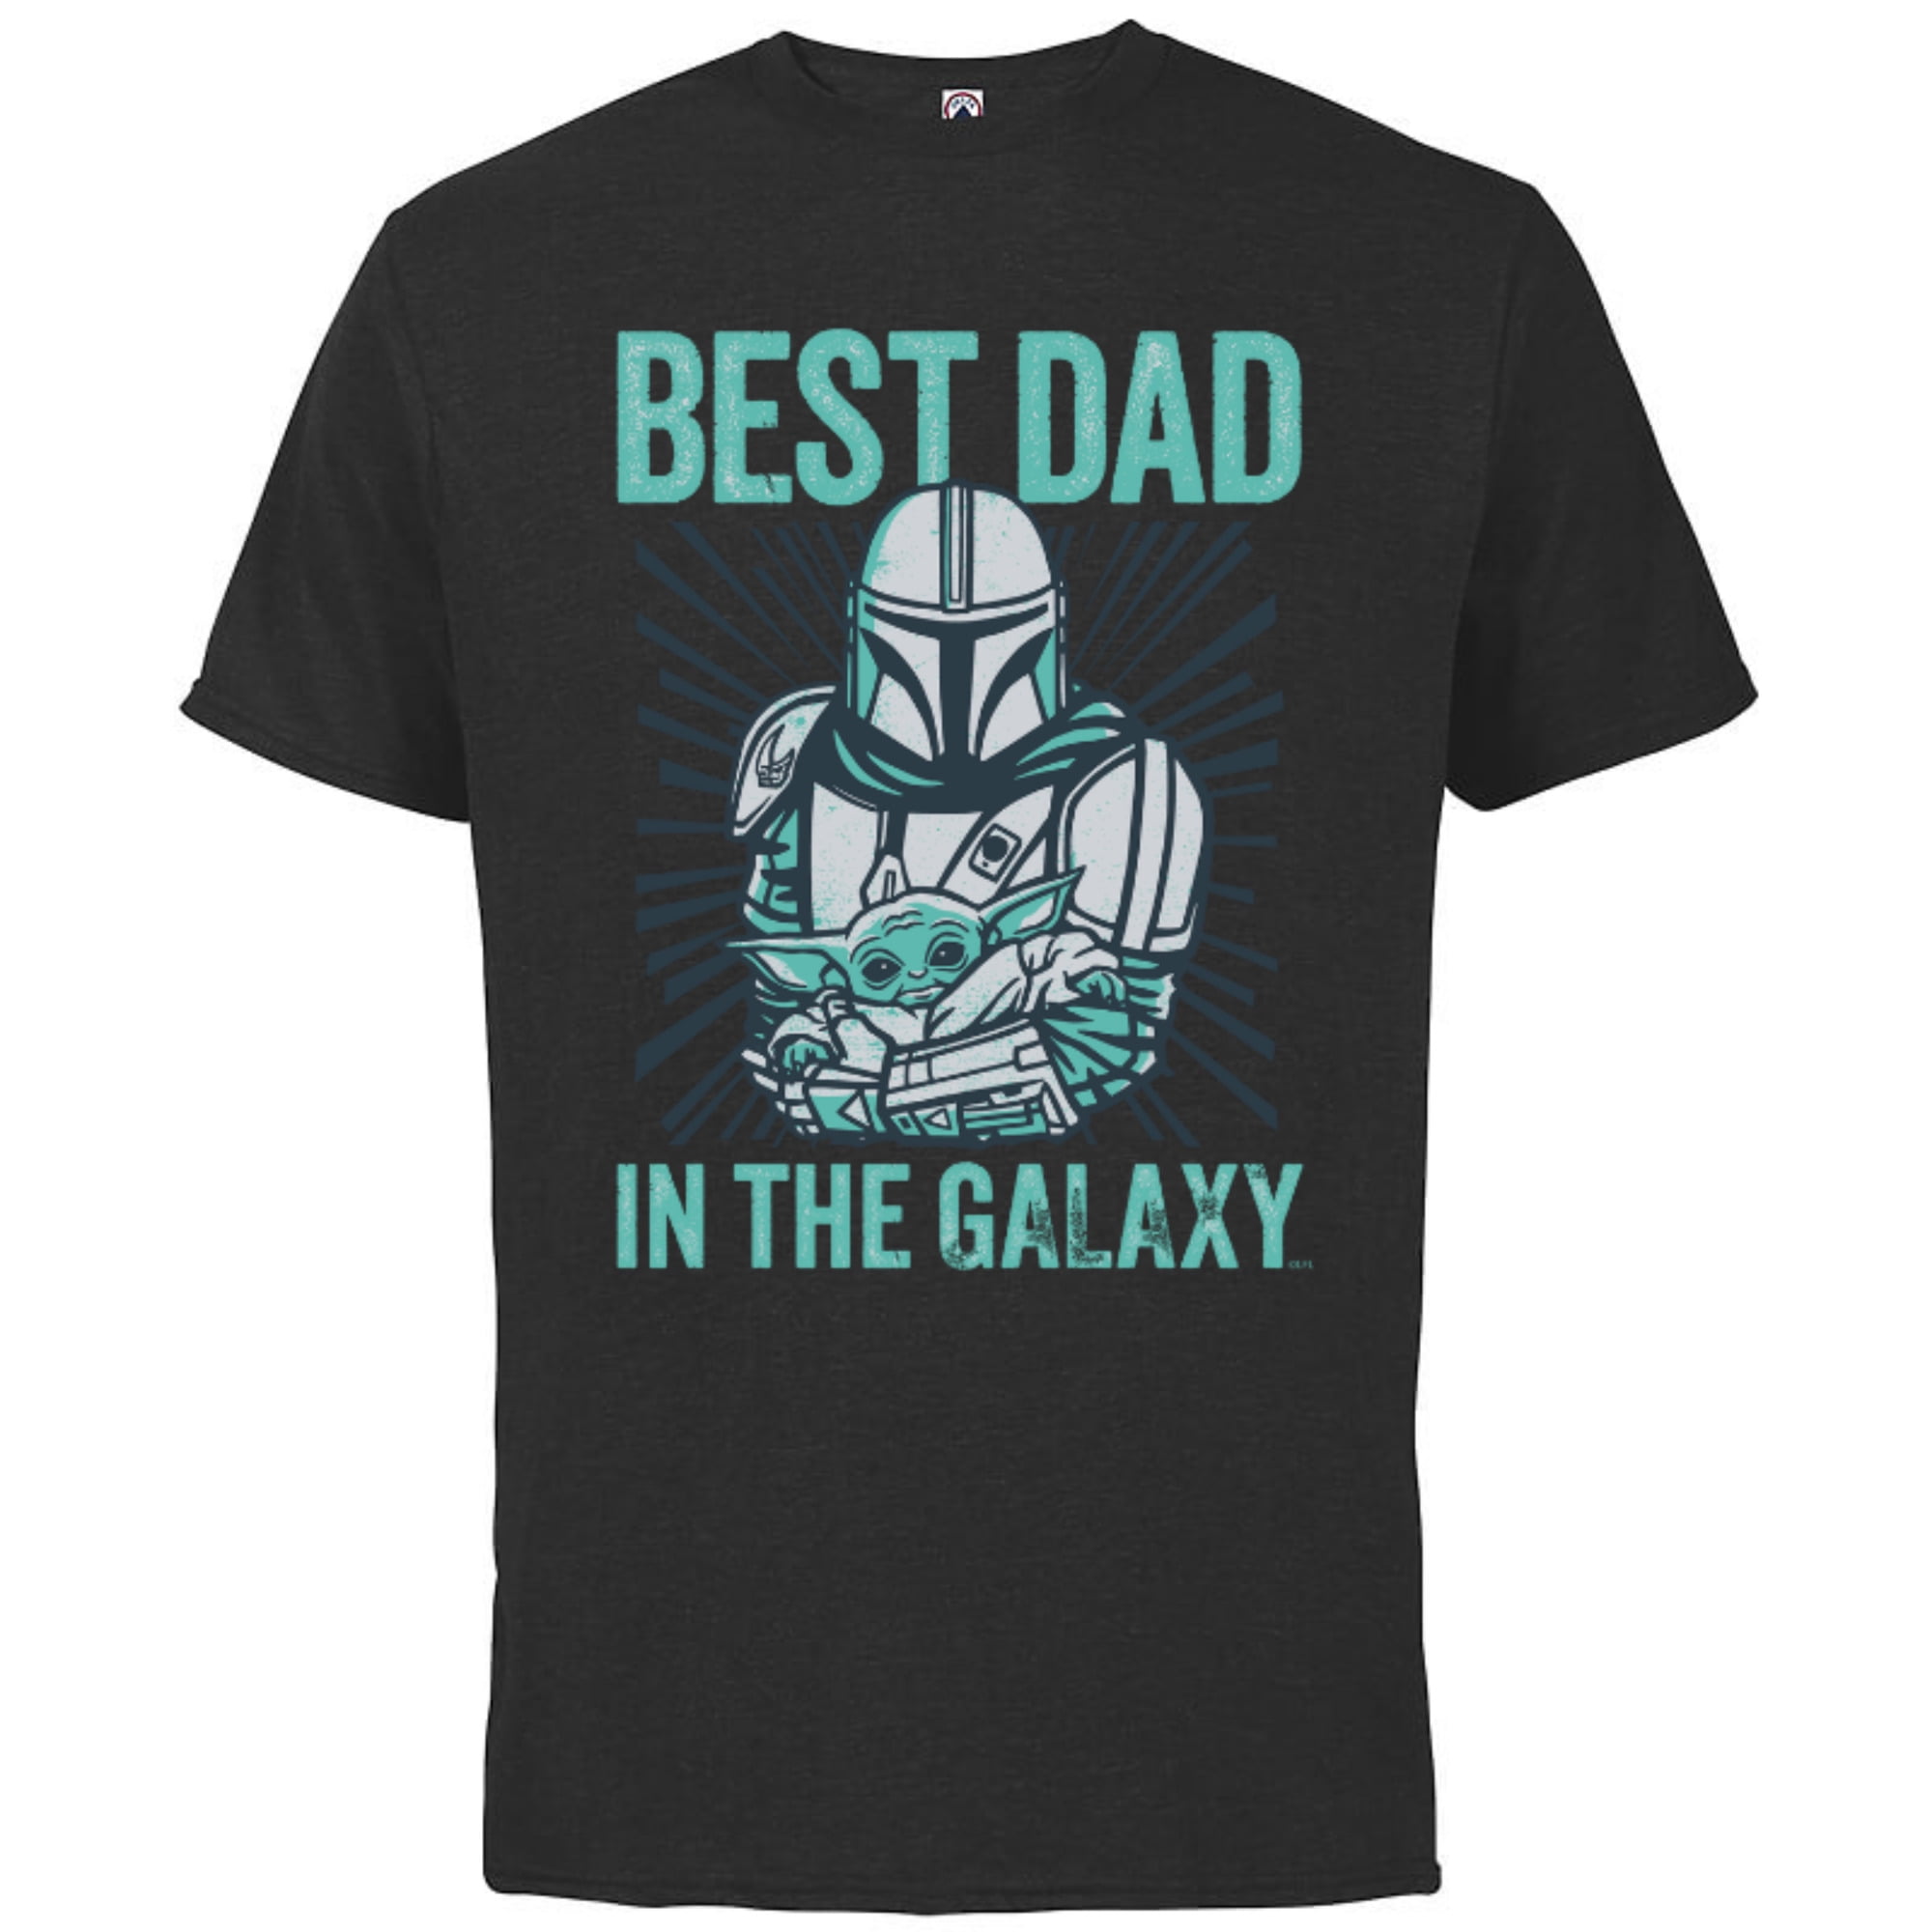 Best Dad Large in and Star Wars: Mandalorian Grogu Djarin Men\'s Galaxy the Black Din Tee X The Graphic